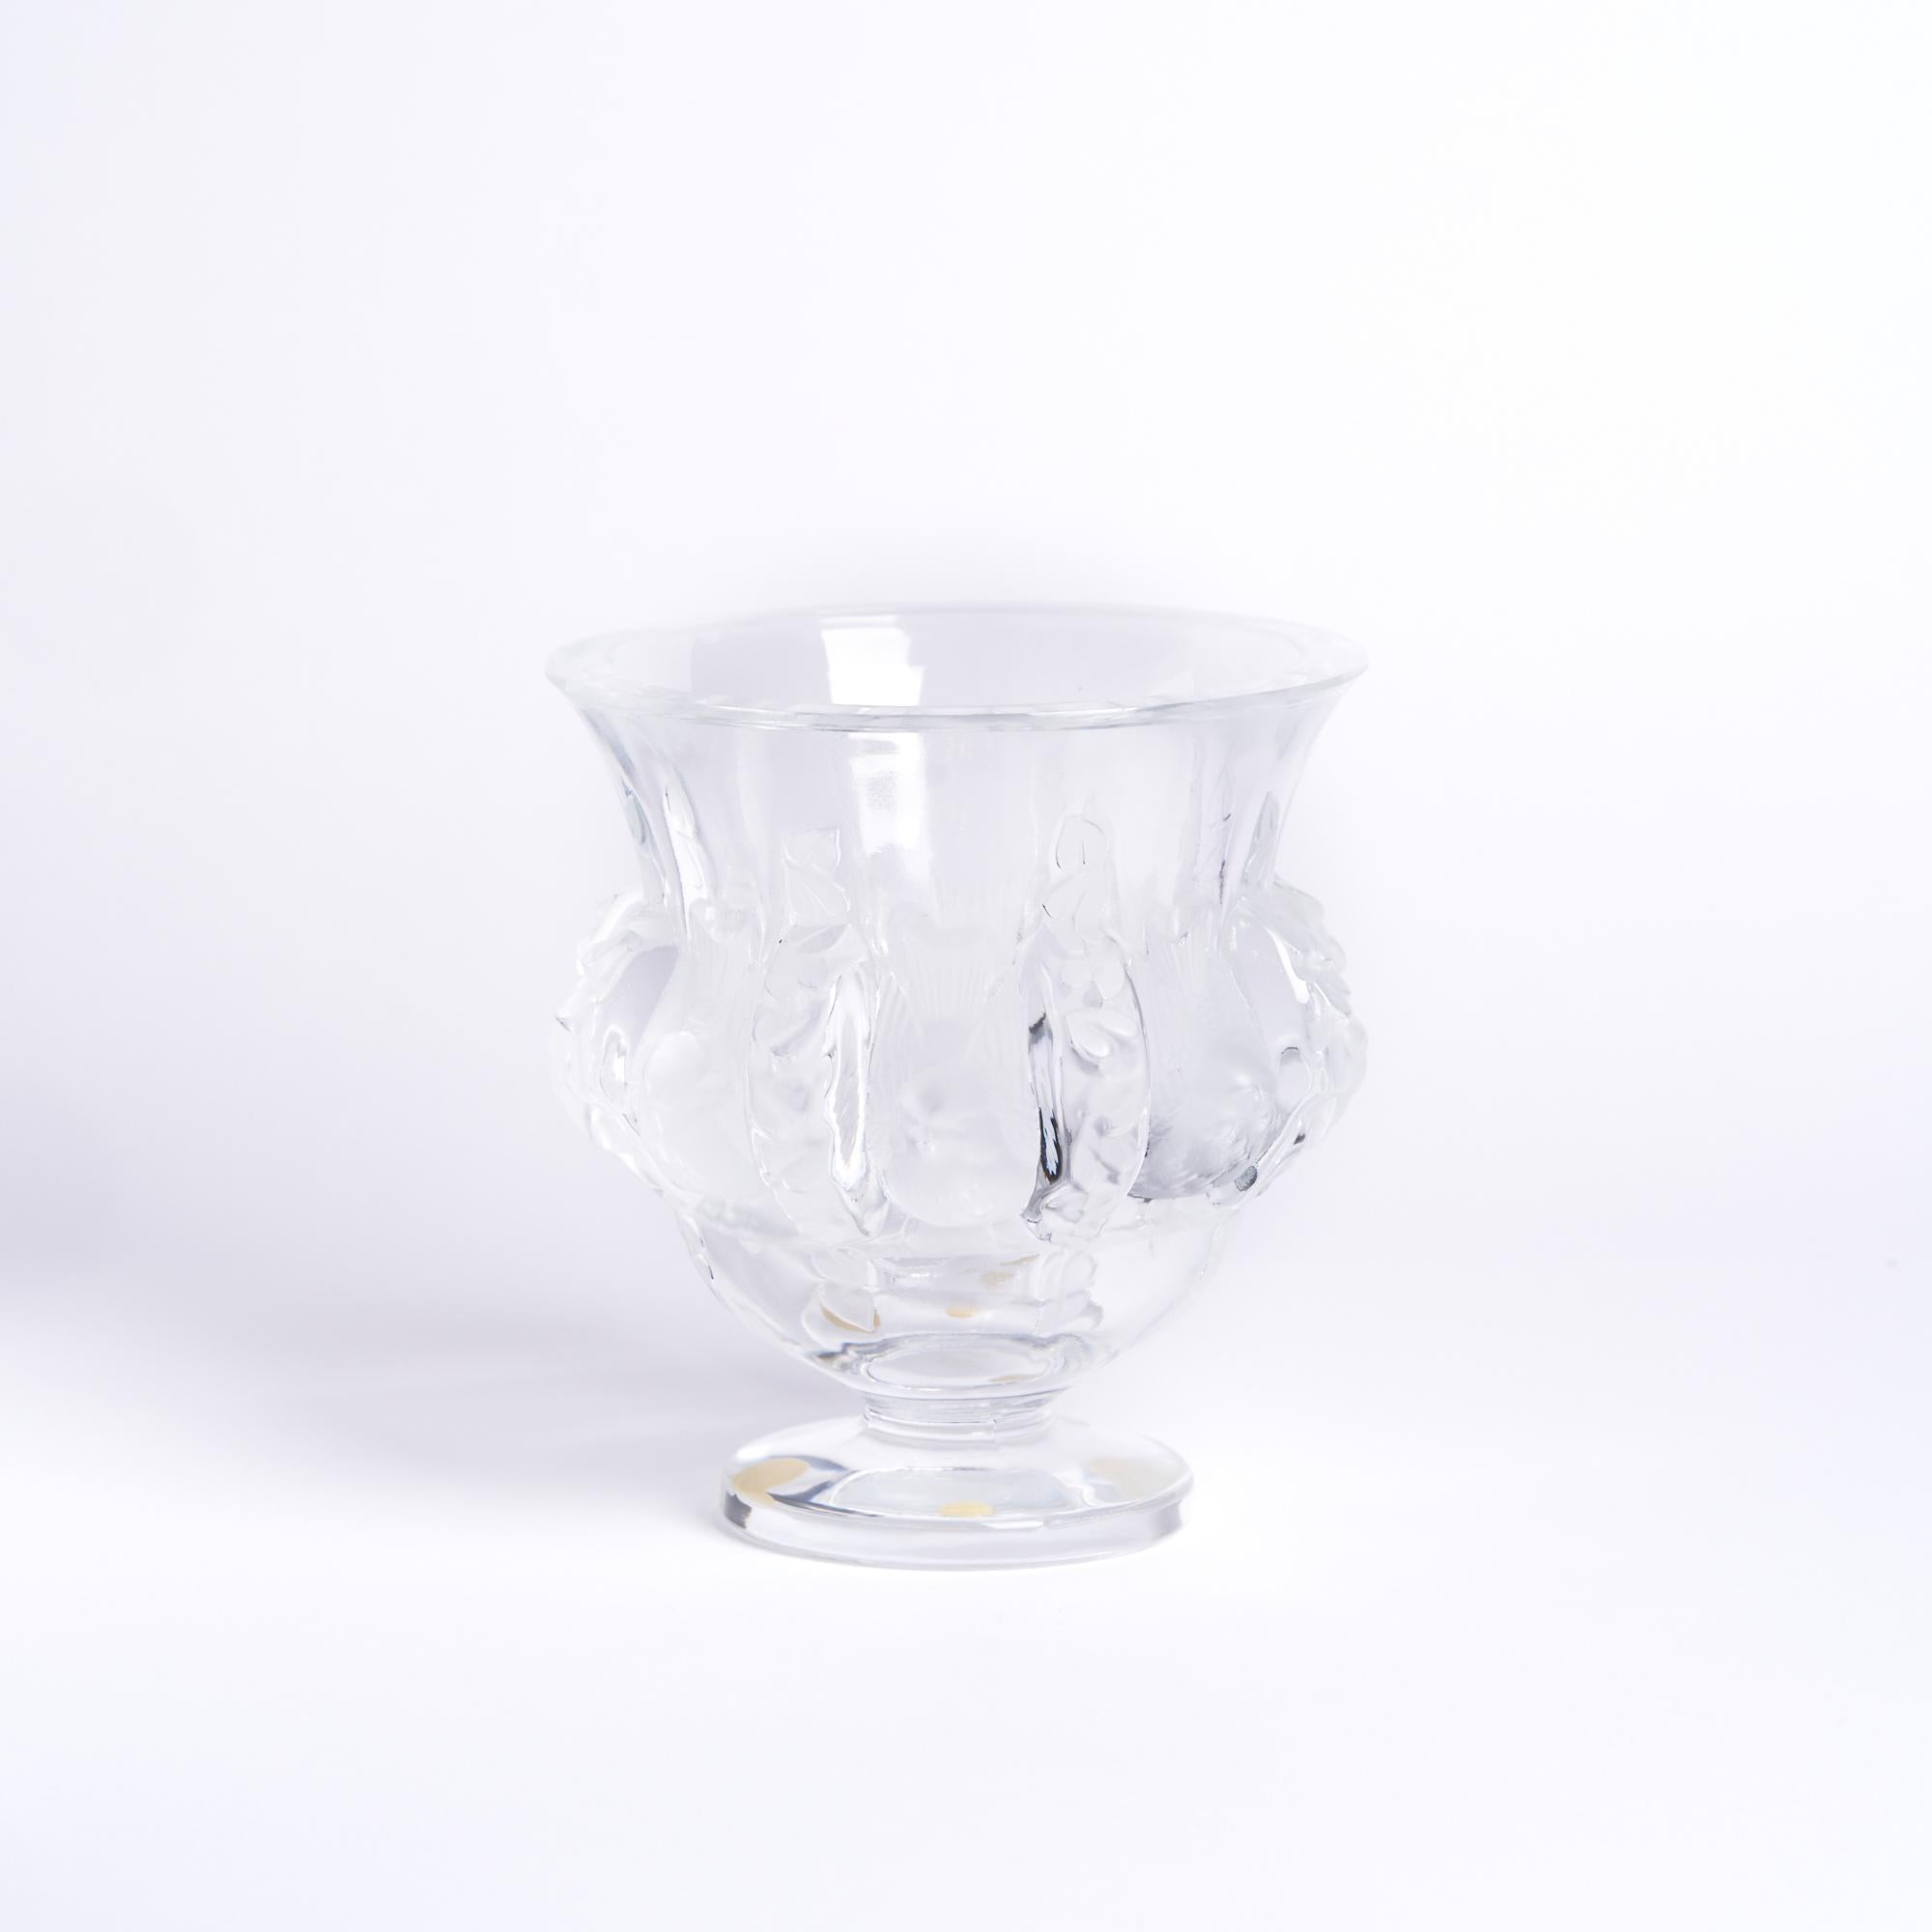 Lalique Dampierre Vase

This plate measures: 4.5 wide x 4.5 deep x 4.75 inches high

Great Vintage Condition

We take our photos in a controlled lighting studio to show as much detail as possible. We do not photoshop out blemishes. 

We keep you